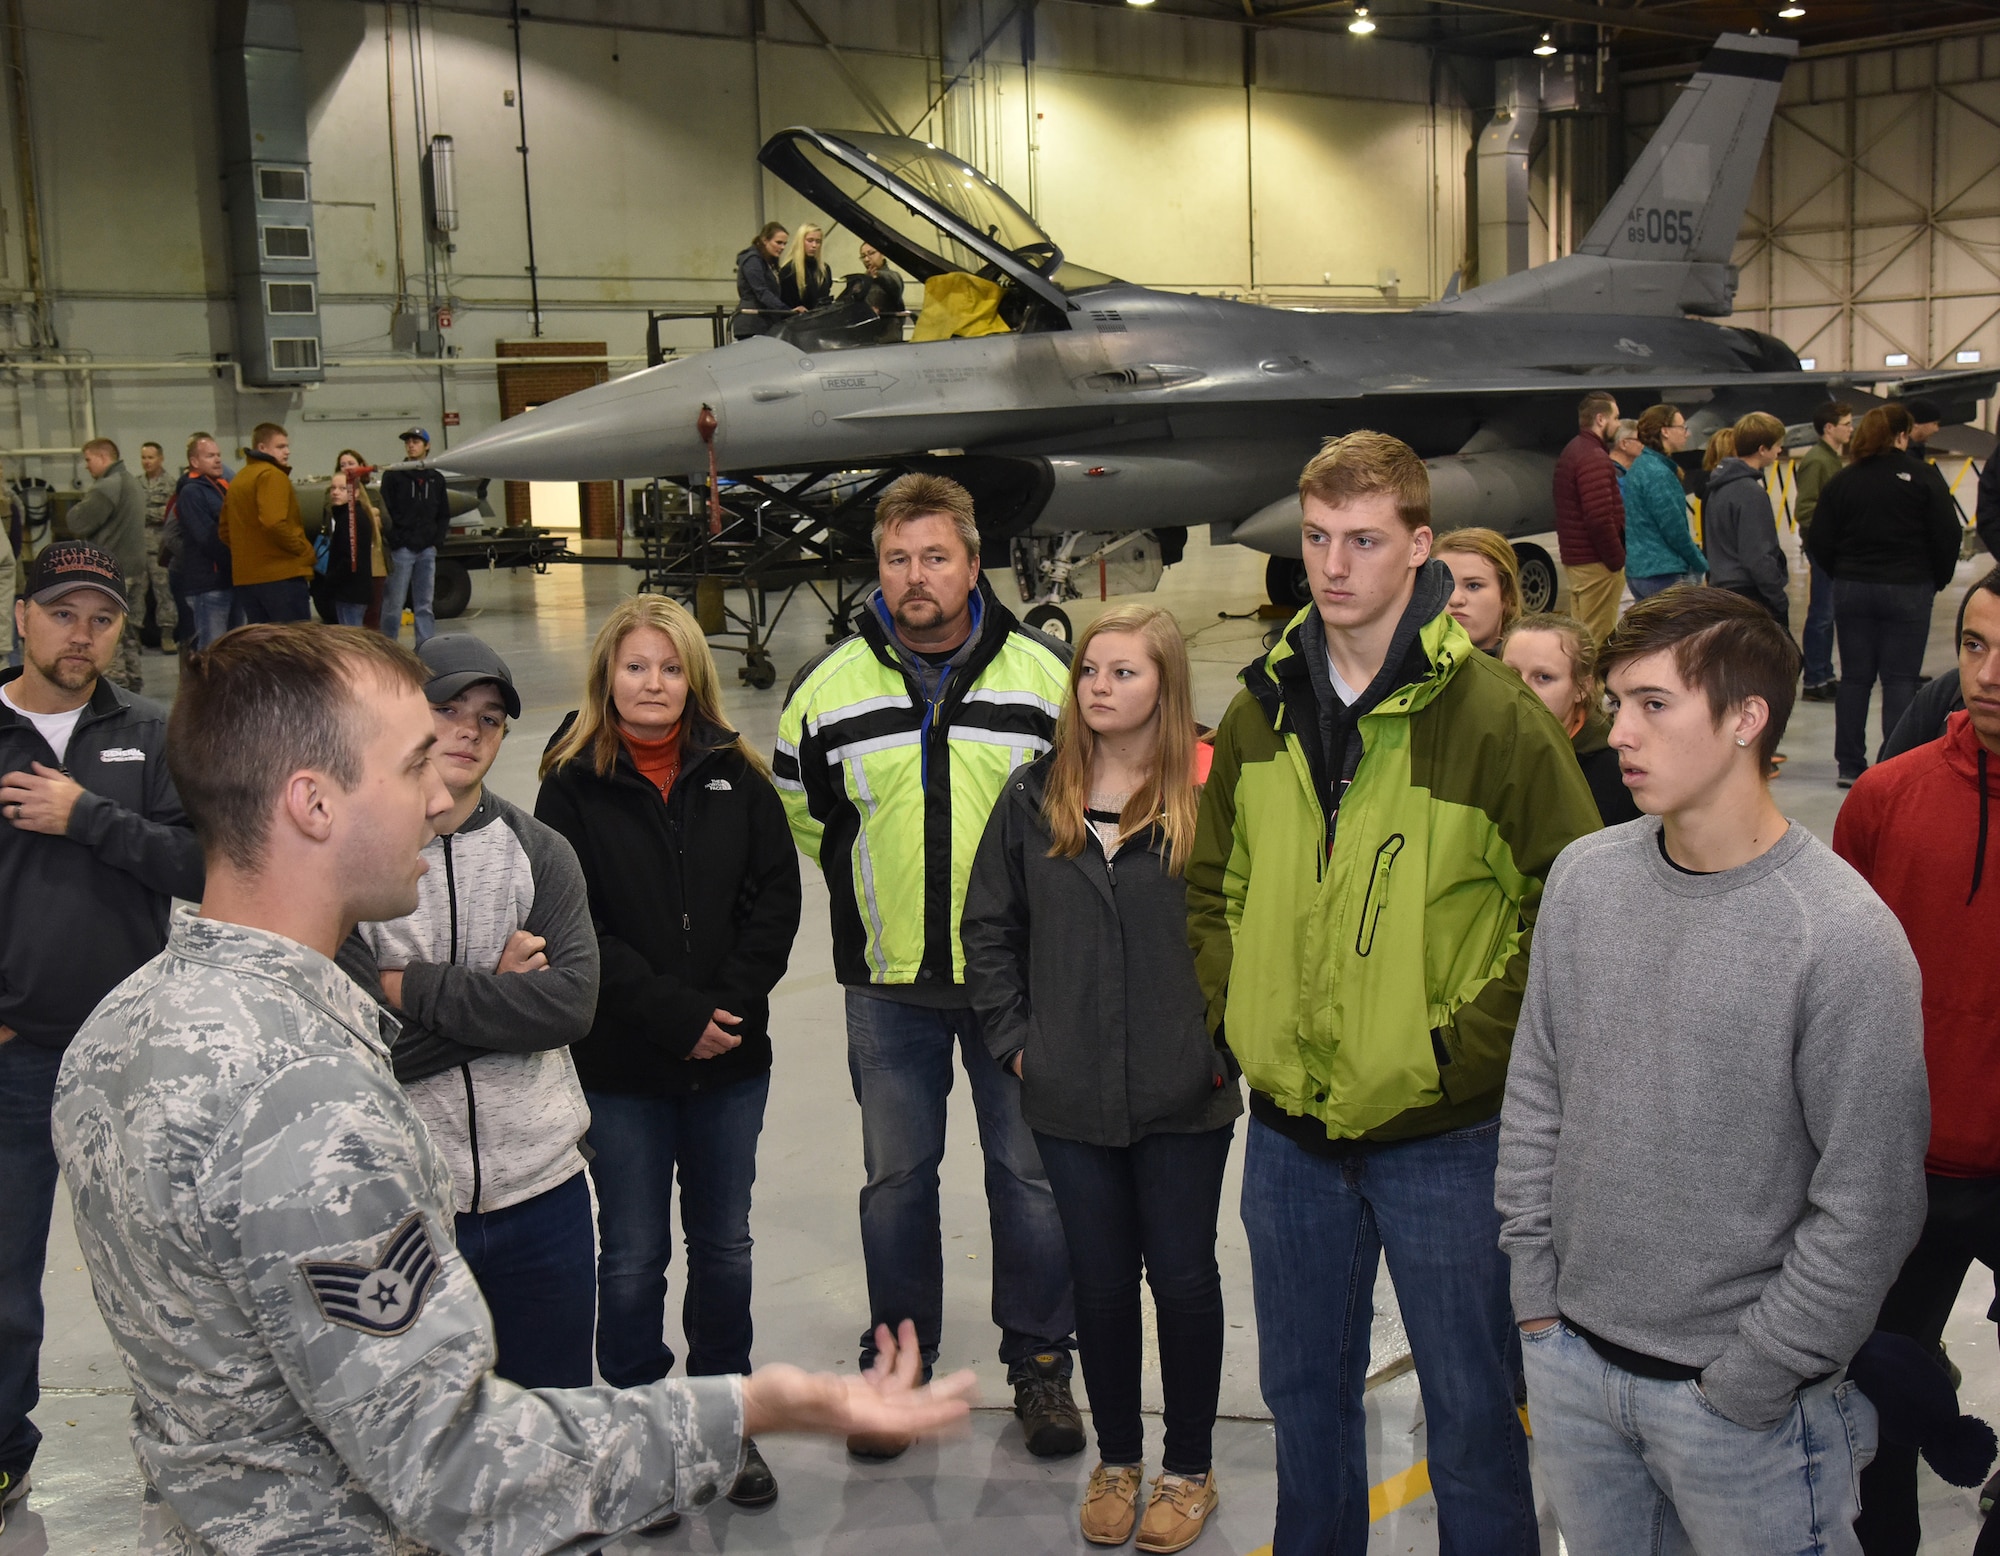 Staff Sgt. Isaac Druin, 114th Civil Engineer Squadron emergency management technician, explains to career day attendees about the functions of the Mobile Emergency Operation Center and the benefits of his career with the 114th Fighter Wing.